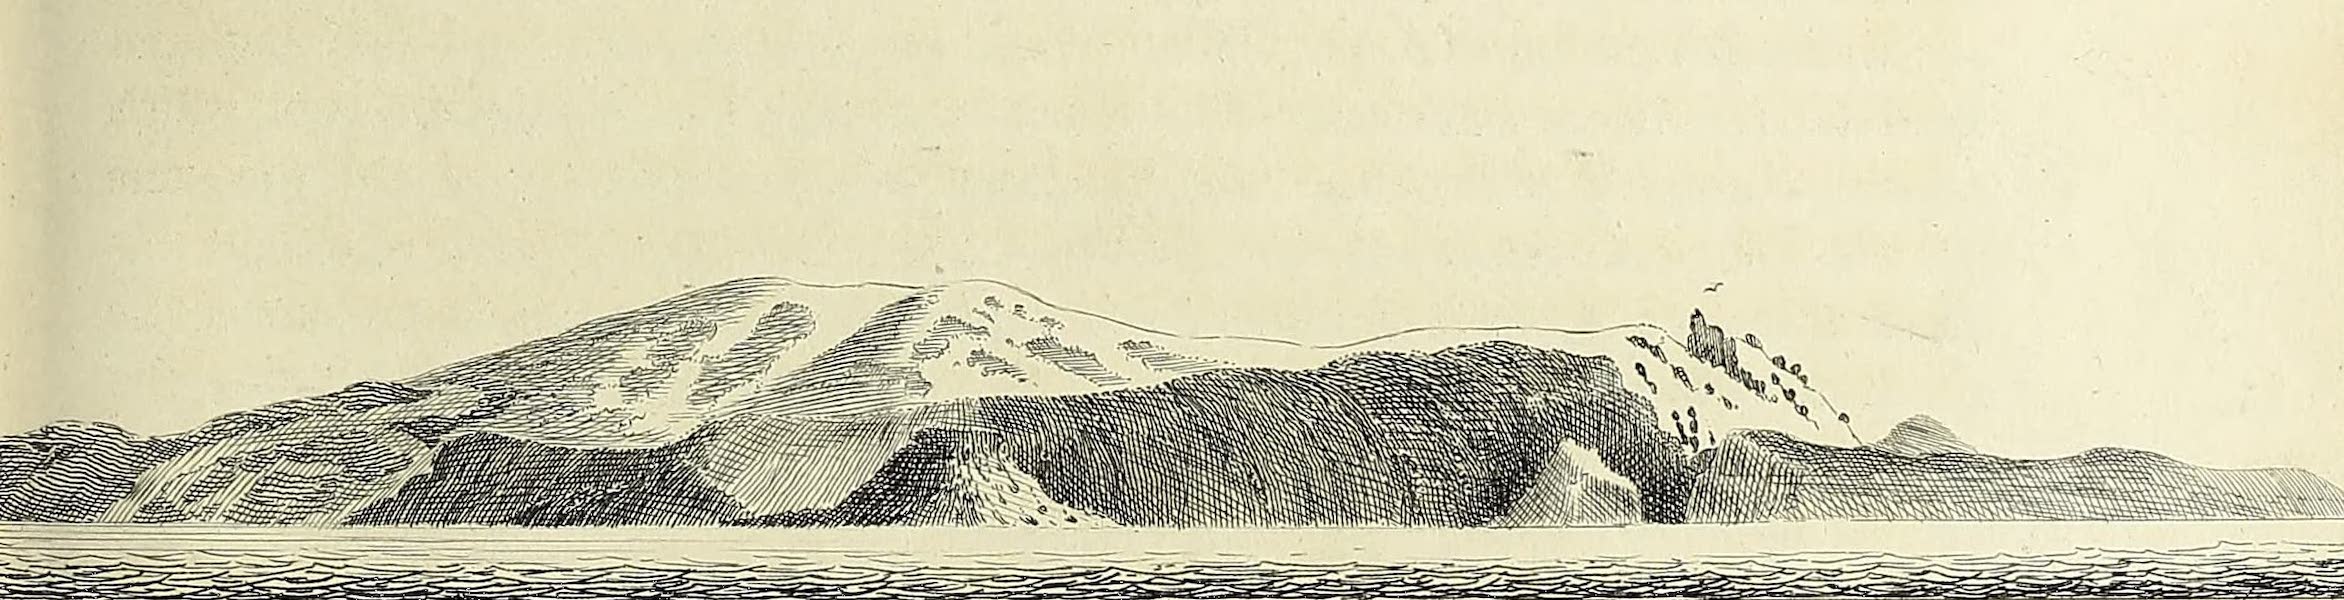 Journal of a Voyage for the Discovery of a North-West Passage - Peak on Bathurst Island (1821)